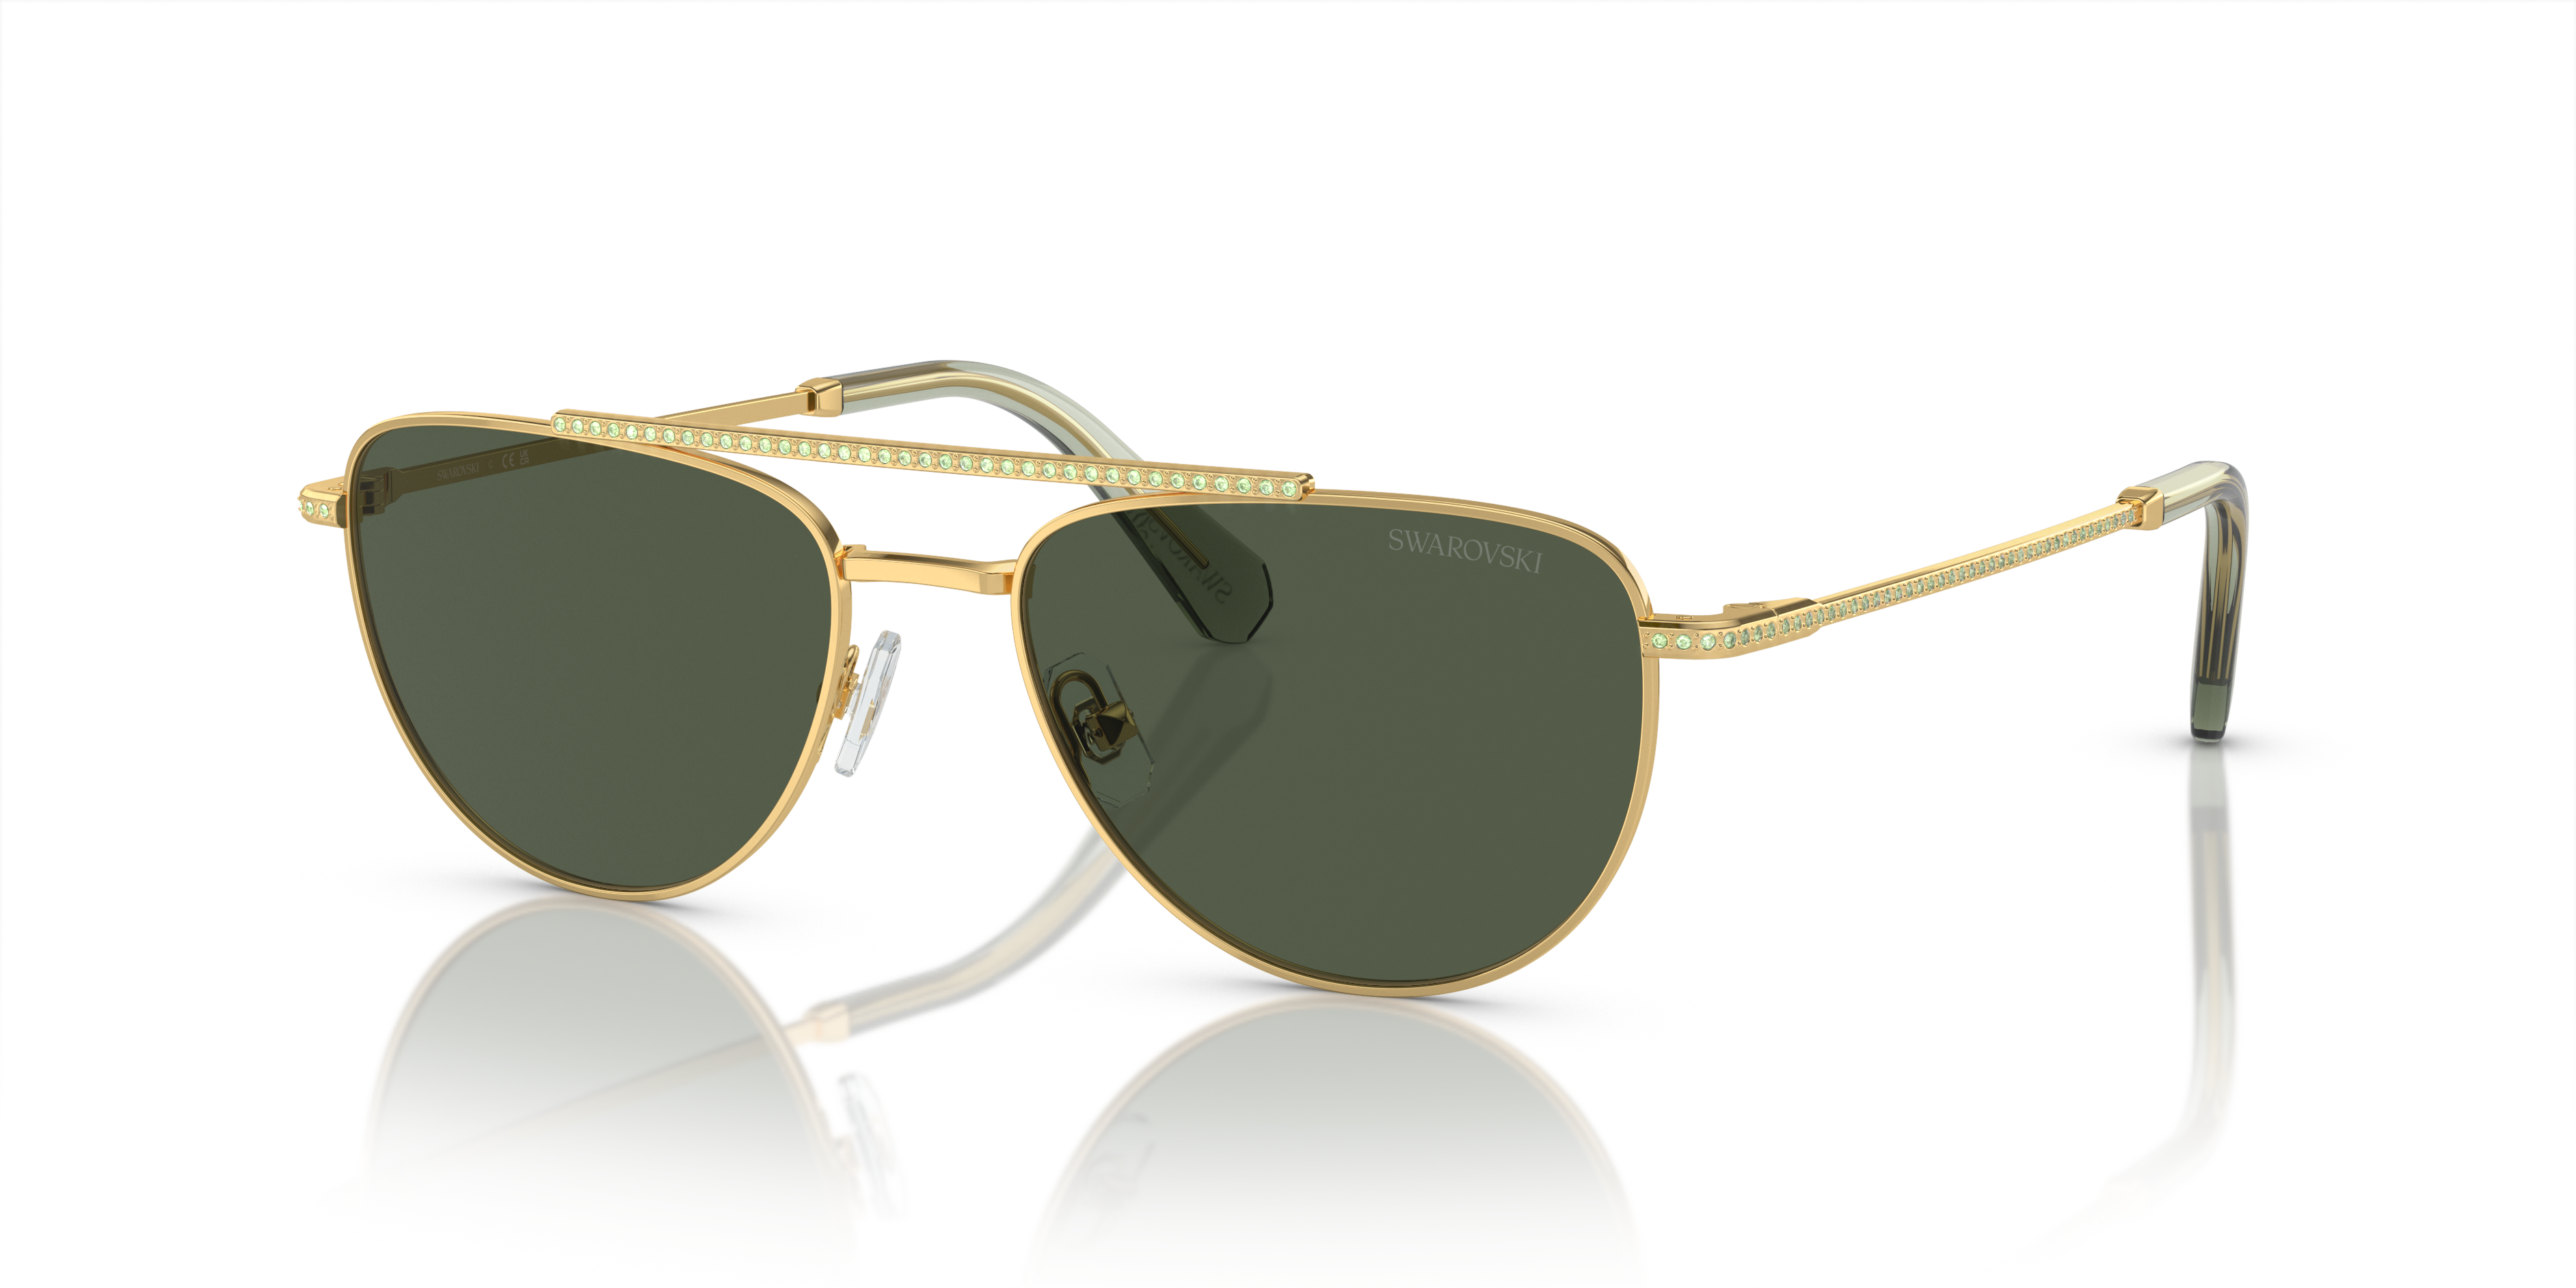 Store Services and Events | Sunglass Hut®